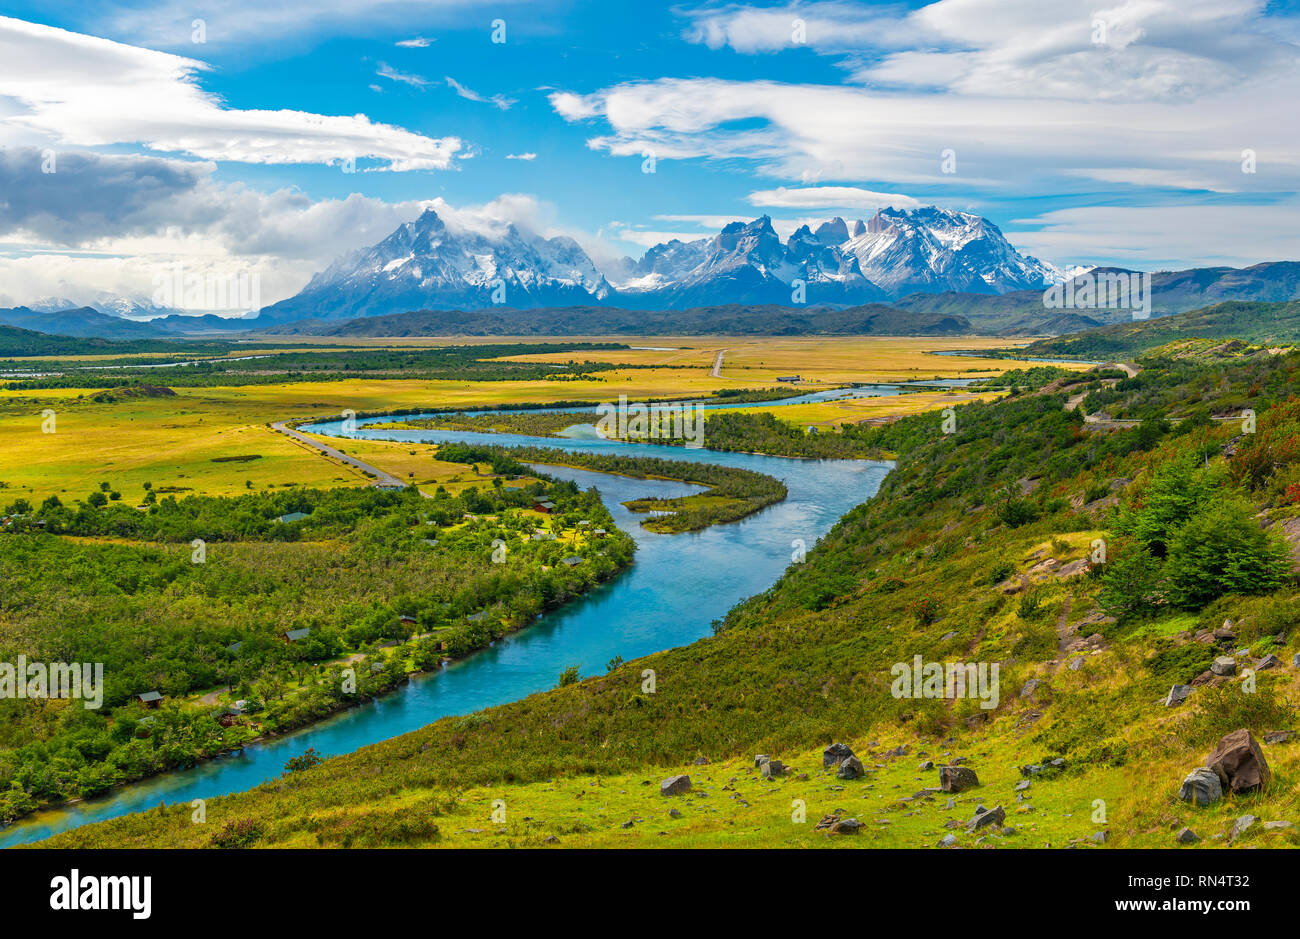 The peaks of Paine Grande, Cuernos and Torres del Paine with the turquoise glacier waters of the serrano river near Puerto Natales, Patagonia, Chile. Stock Photo